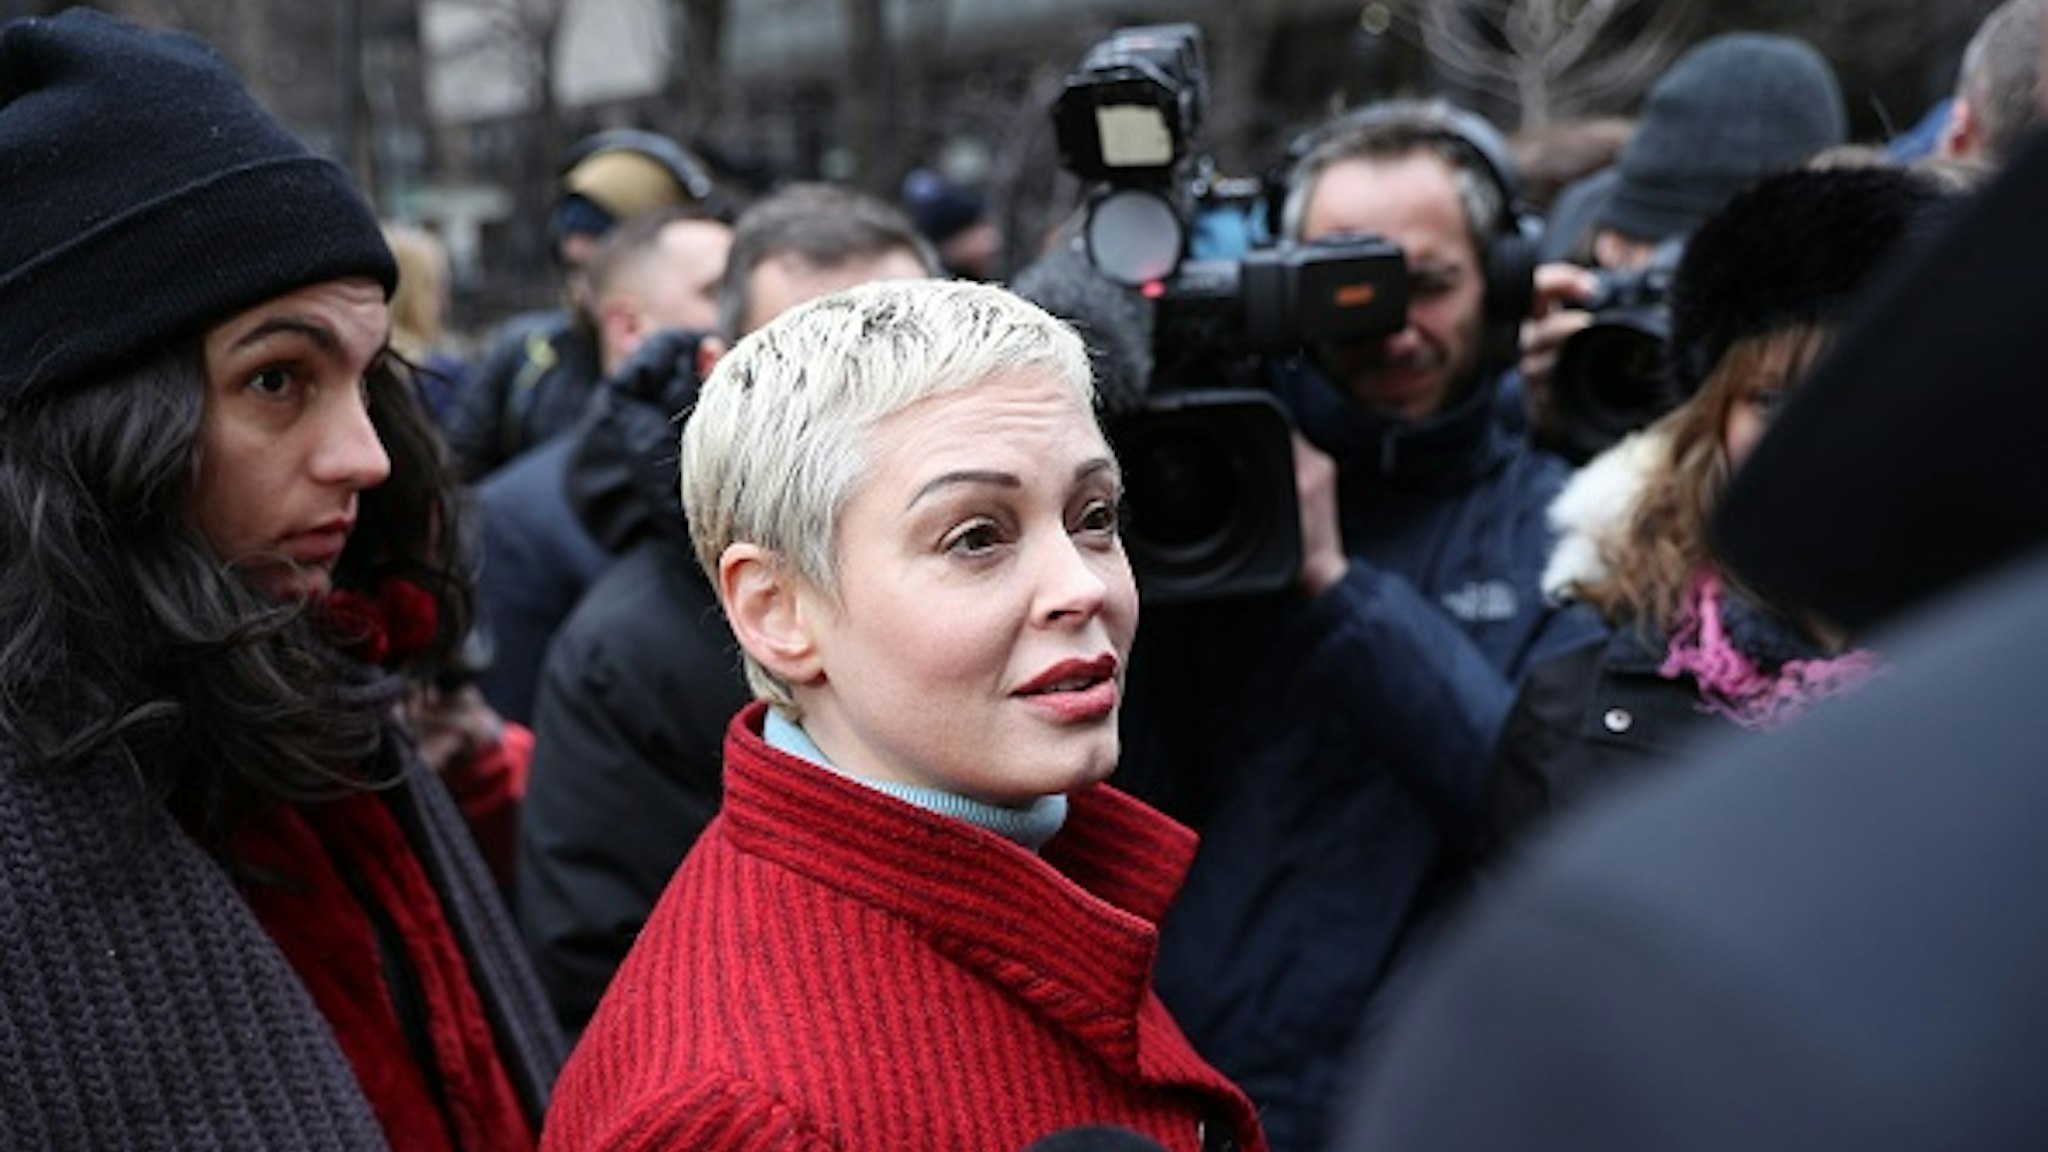 NEW YORK, USA - JANUARY 6: Rose McGowan who has accused former Hollywood producer Harvey Weinstein of sexual assault, arrives at New York Supreme Court, in New York, United States on January 6, 2020 on the first day of Harvey Weinstein trial on charges of rape and sexual assault.